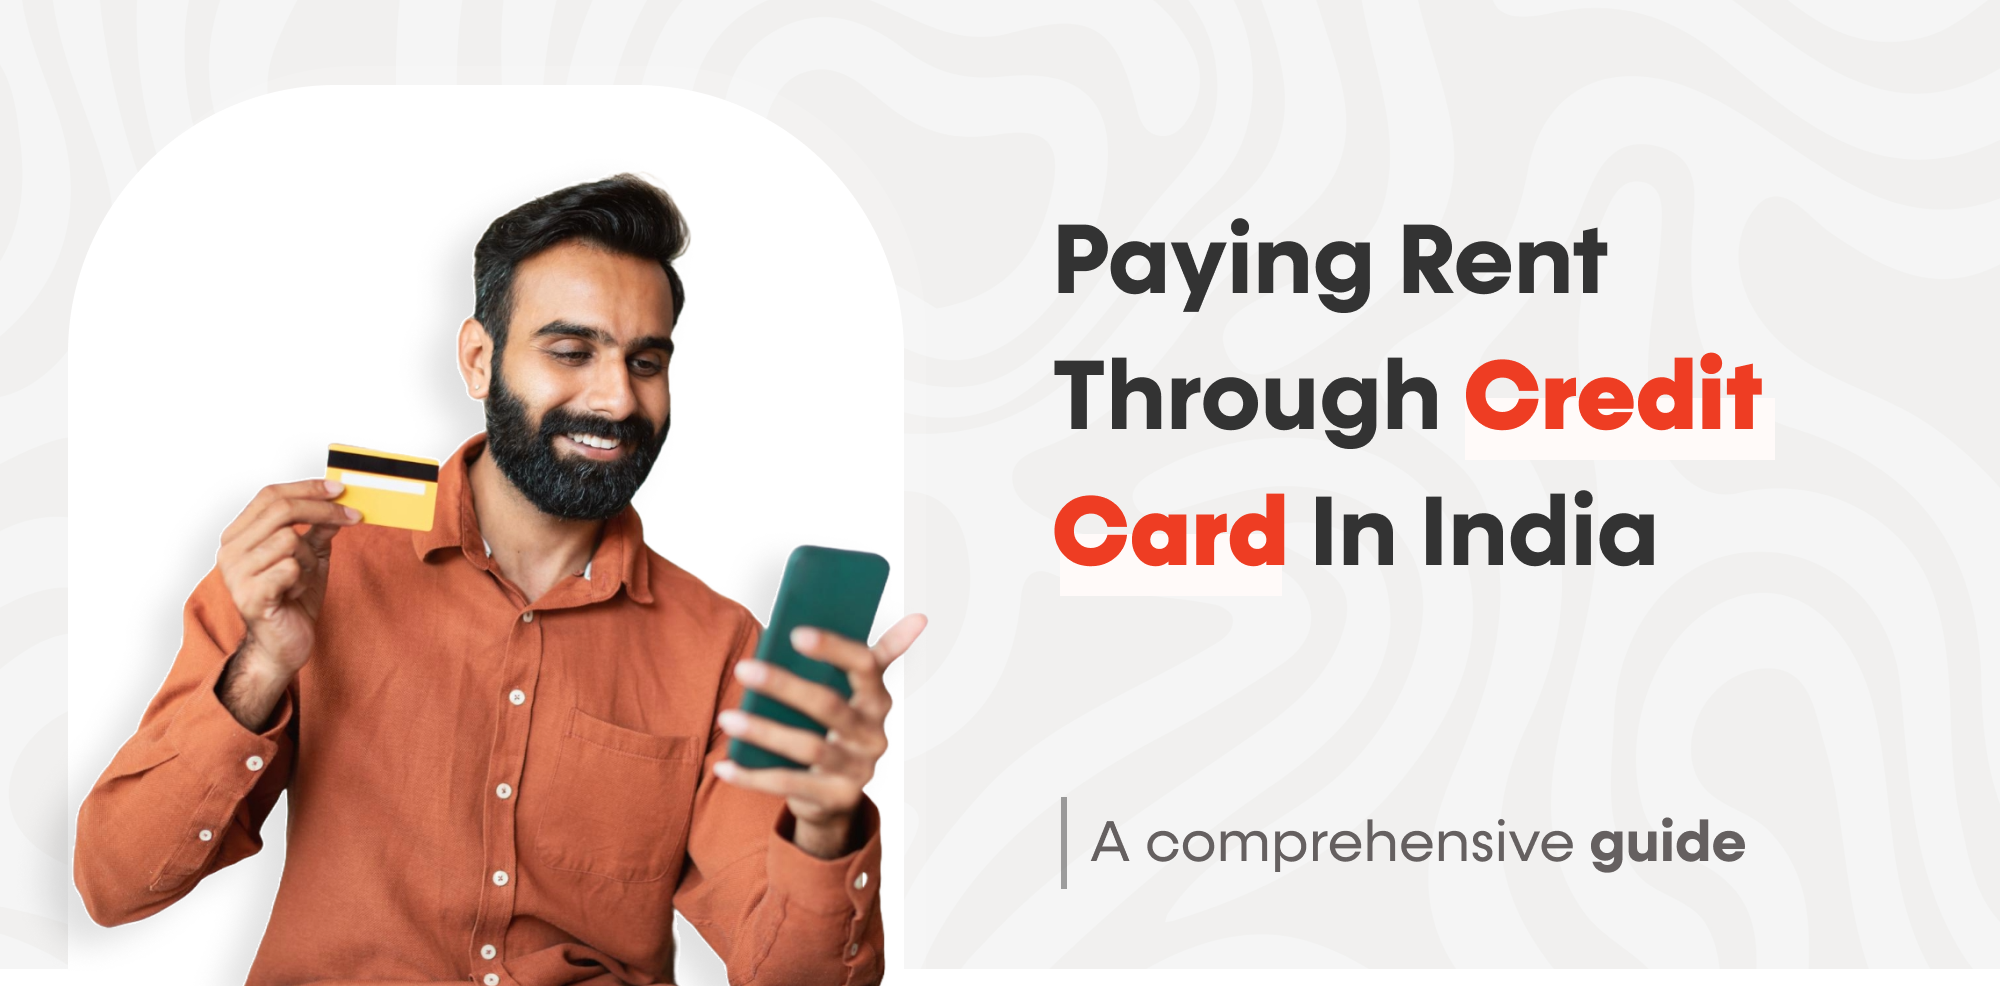 Paying Rent Through Credit Card in India: A Comprehensive Guide